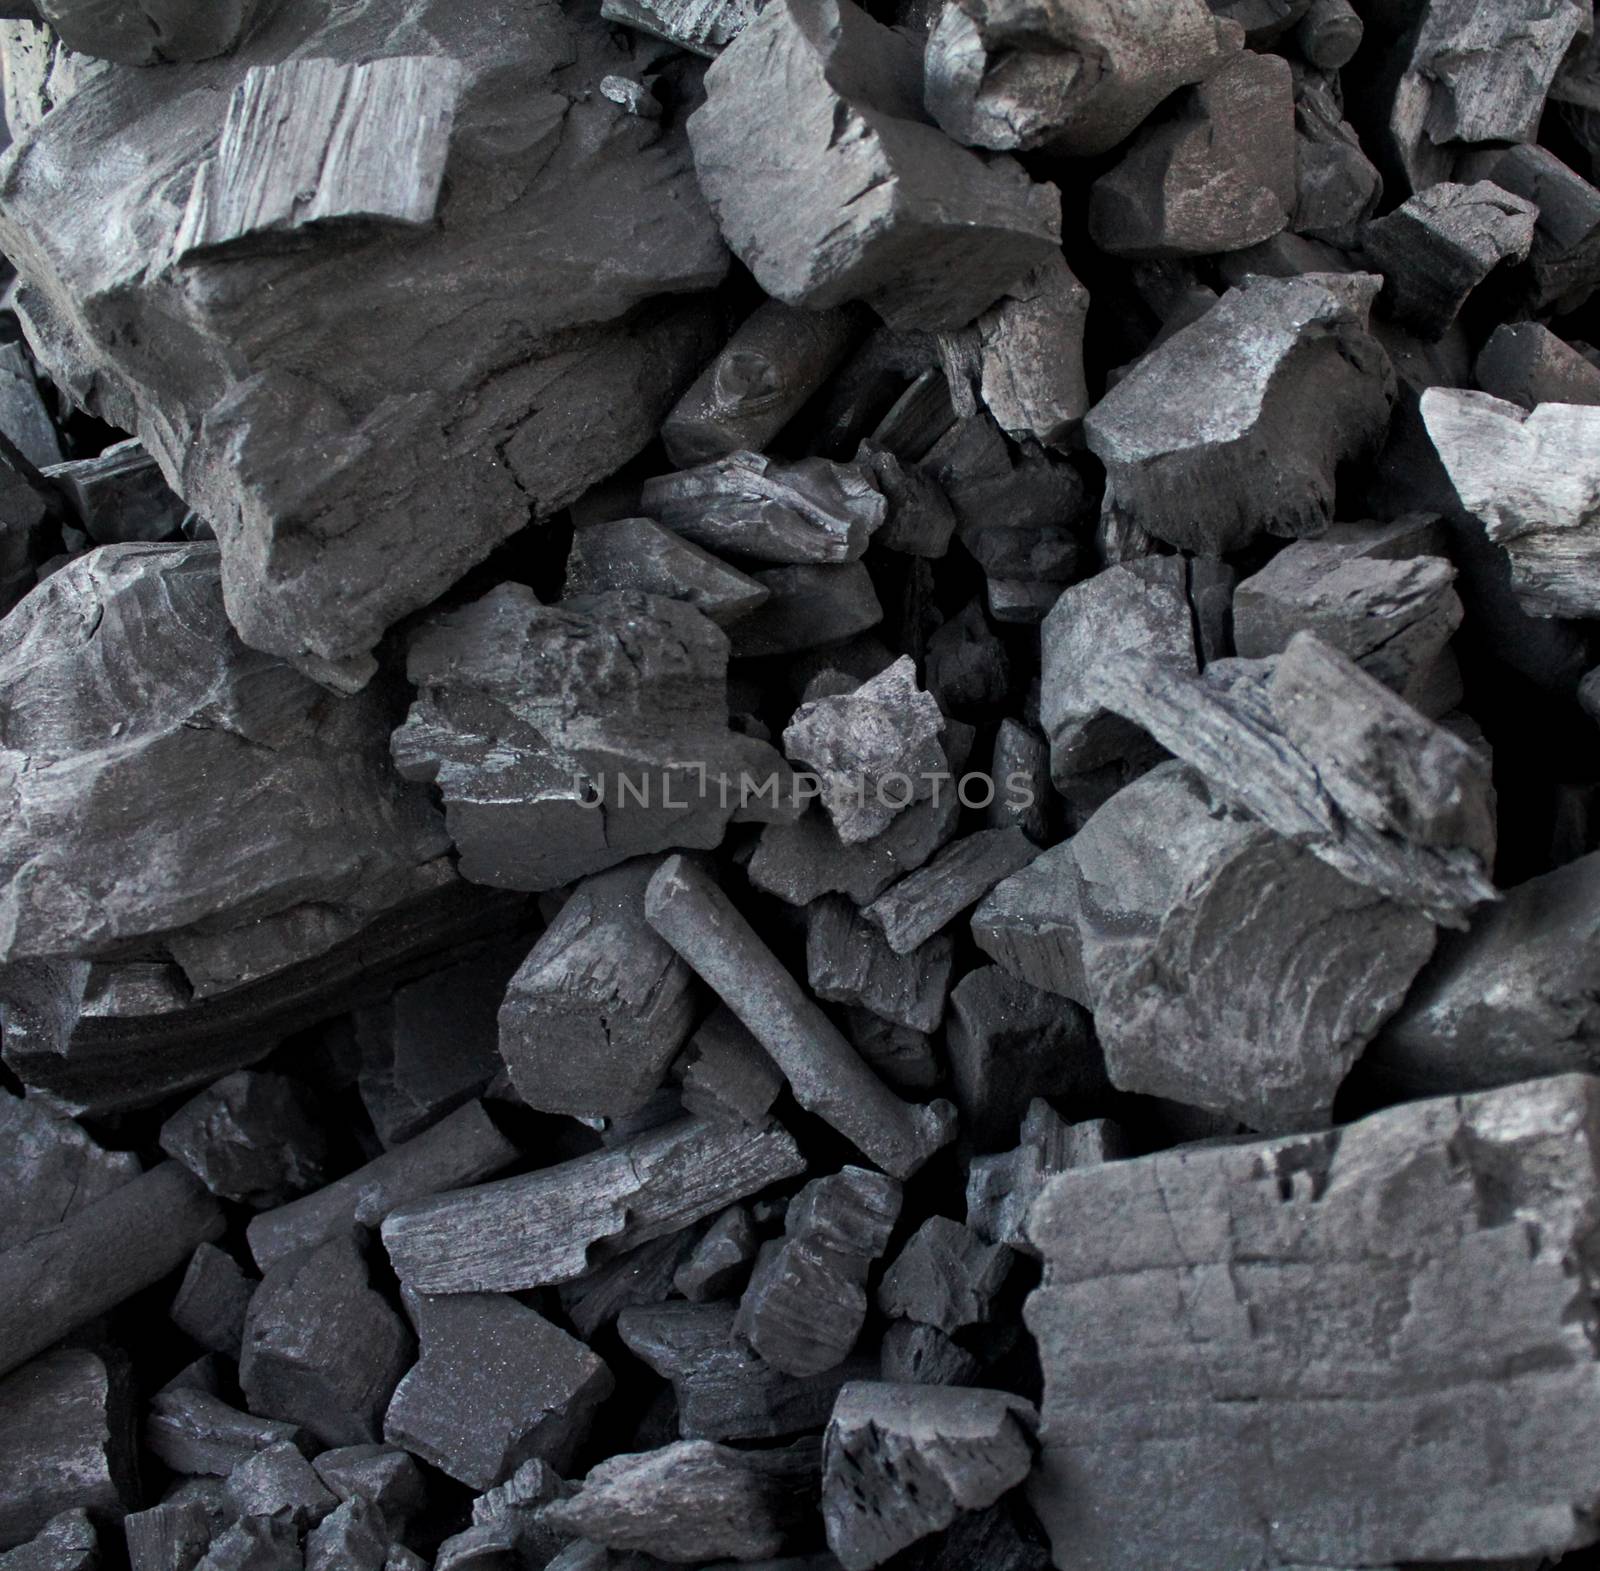 Pile of coal makes a cool pattern for a background.